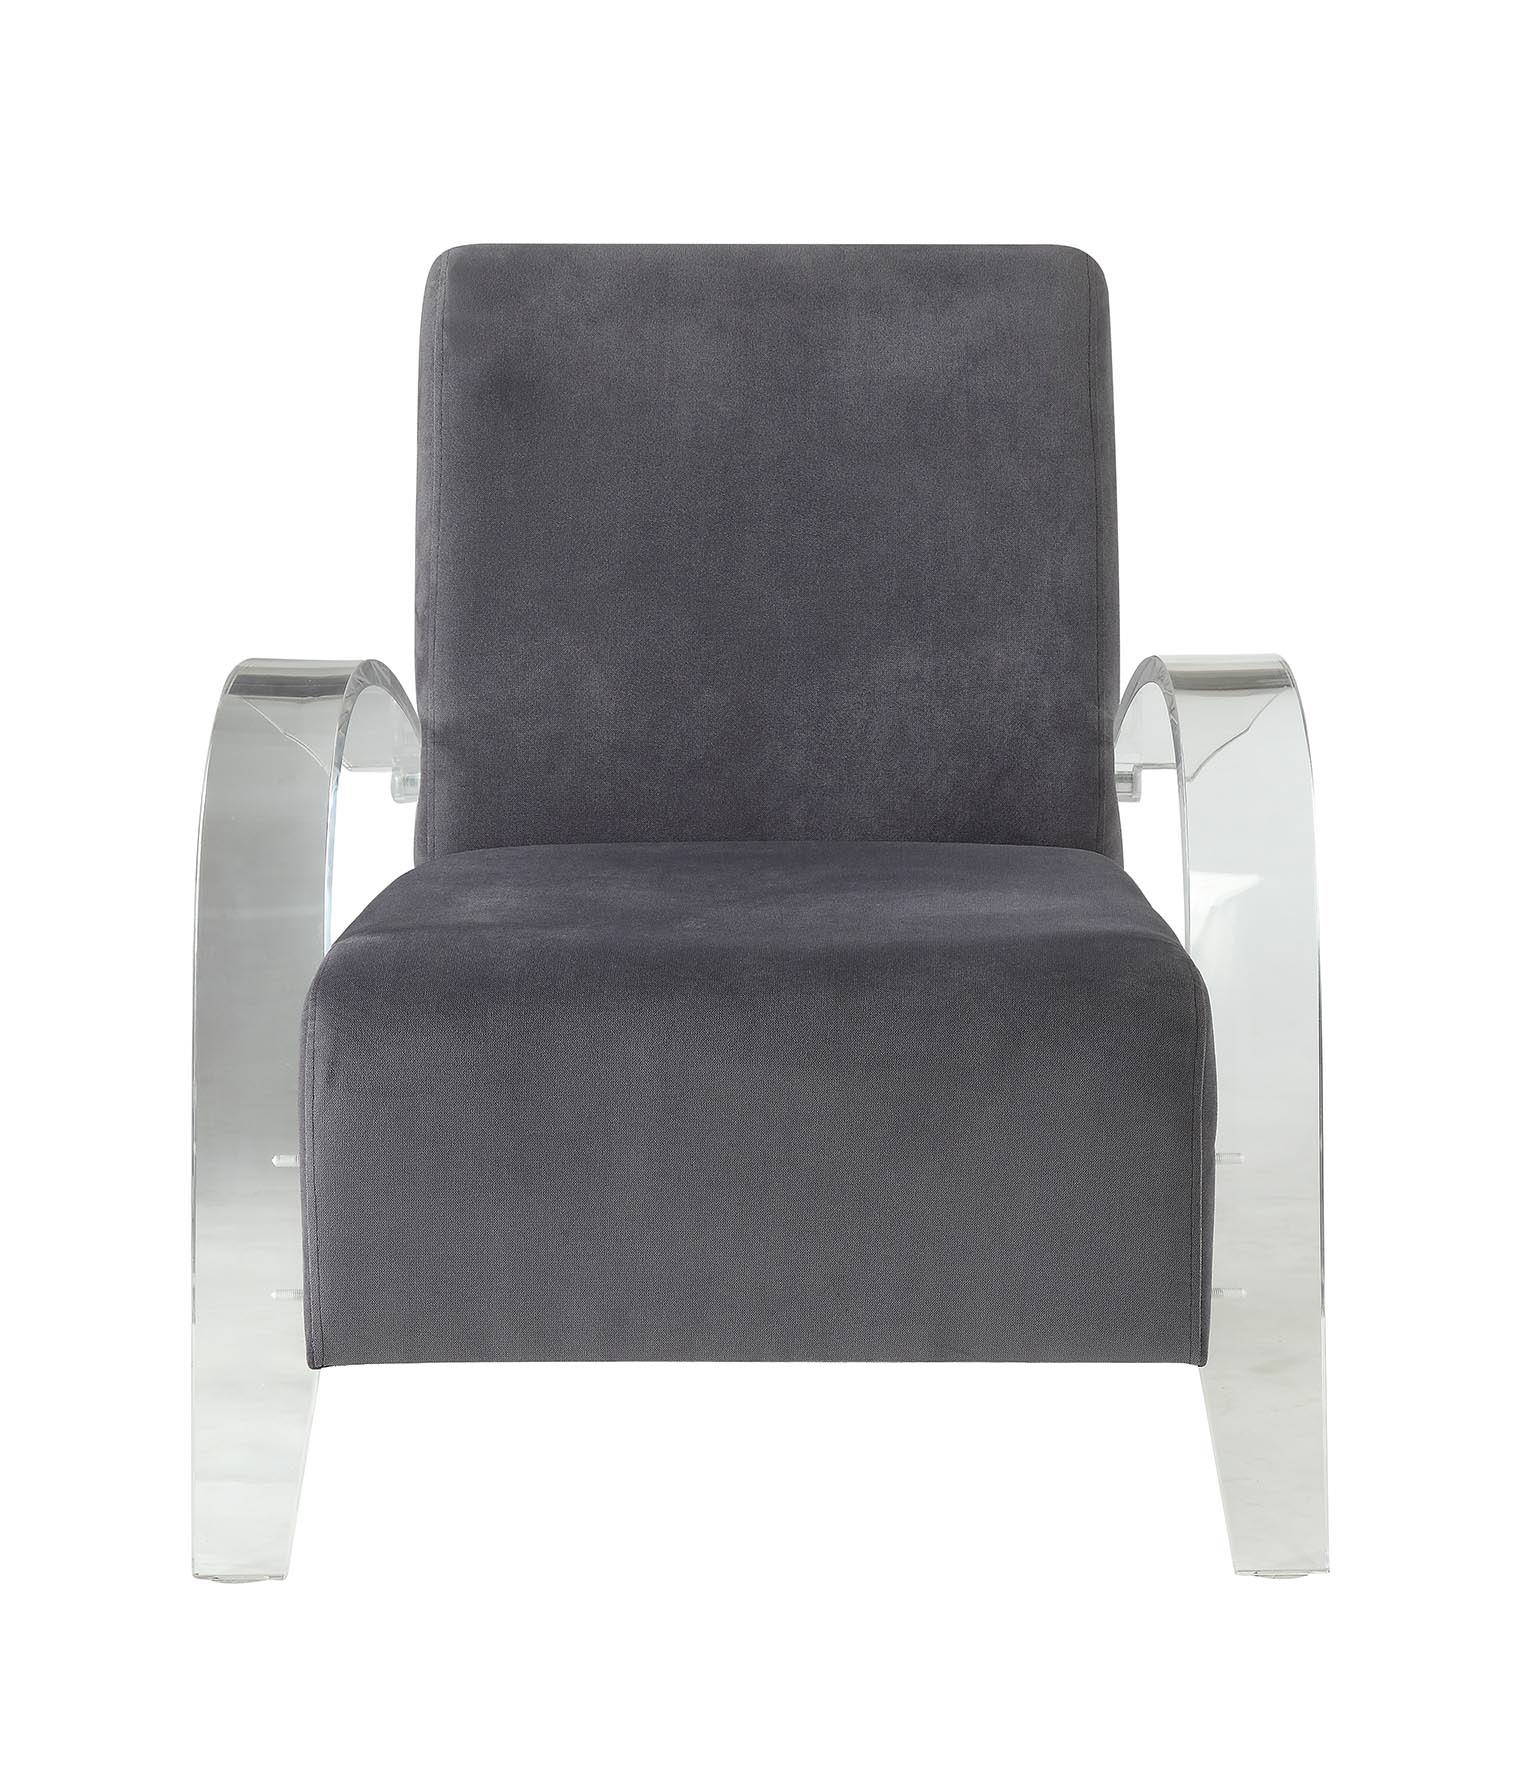 30" X 31" X 36" Charcoal Clear Acrylic Upholstery Acrylic Accent Chair